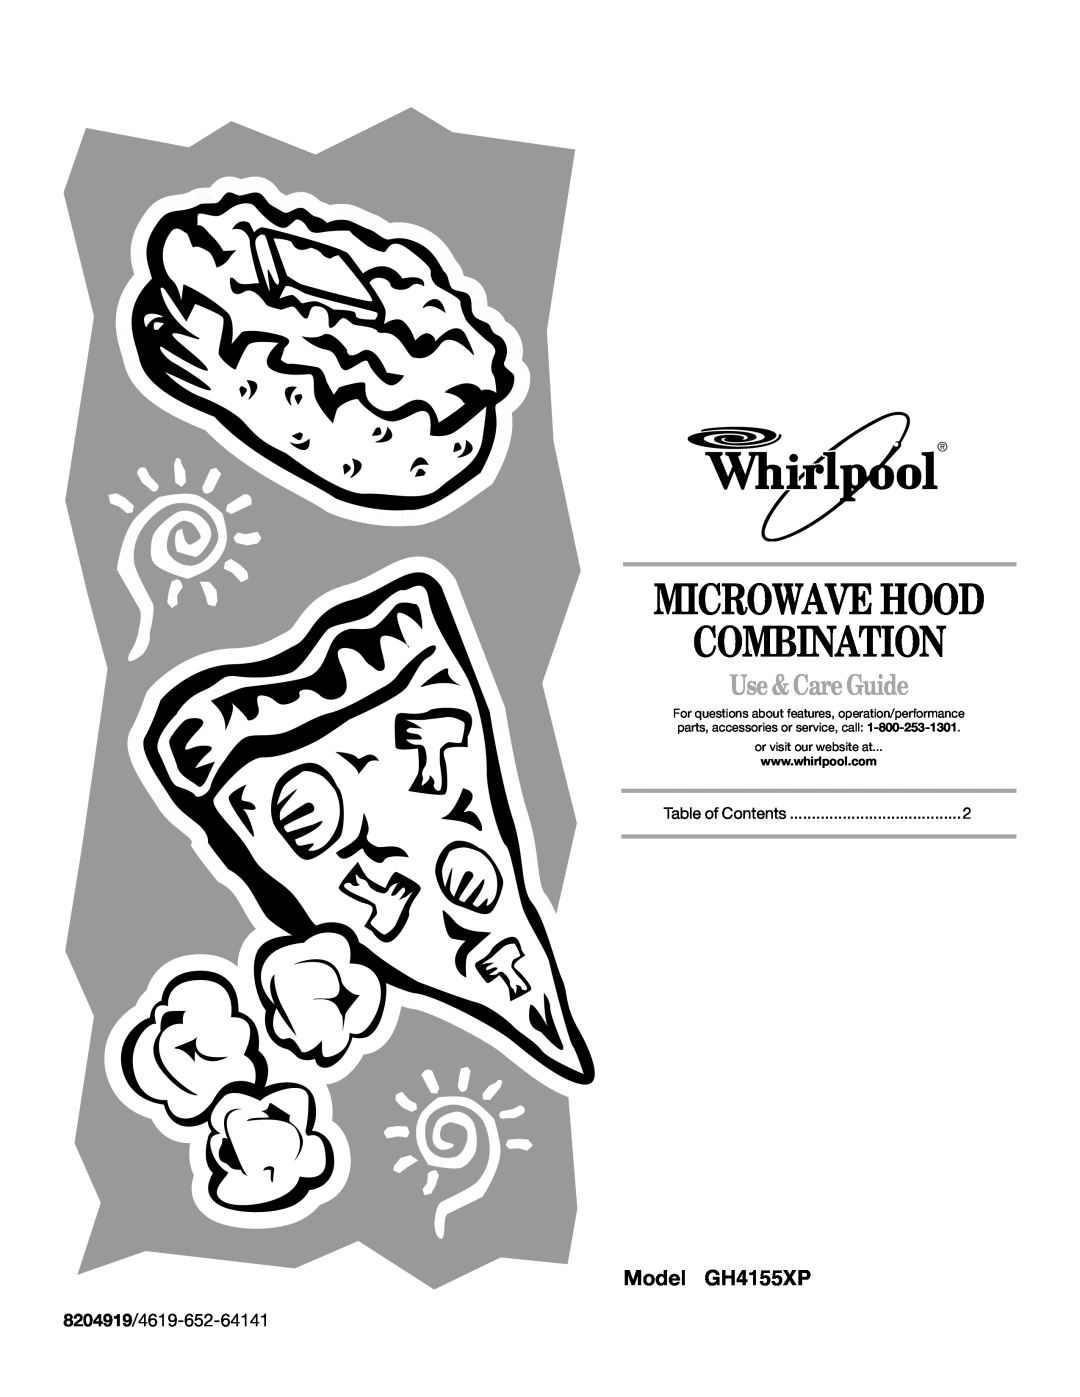 Whirlpool manual Model GH4155XP, 8204919/4619-652-64141, Microwave Hood Combination, Use & Care Guide 